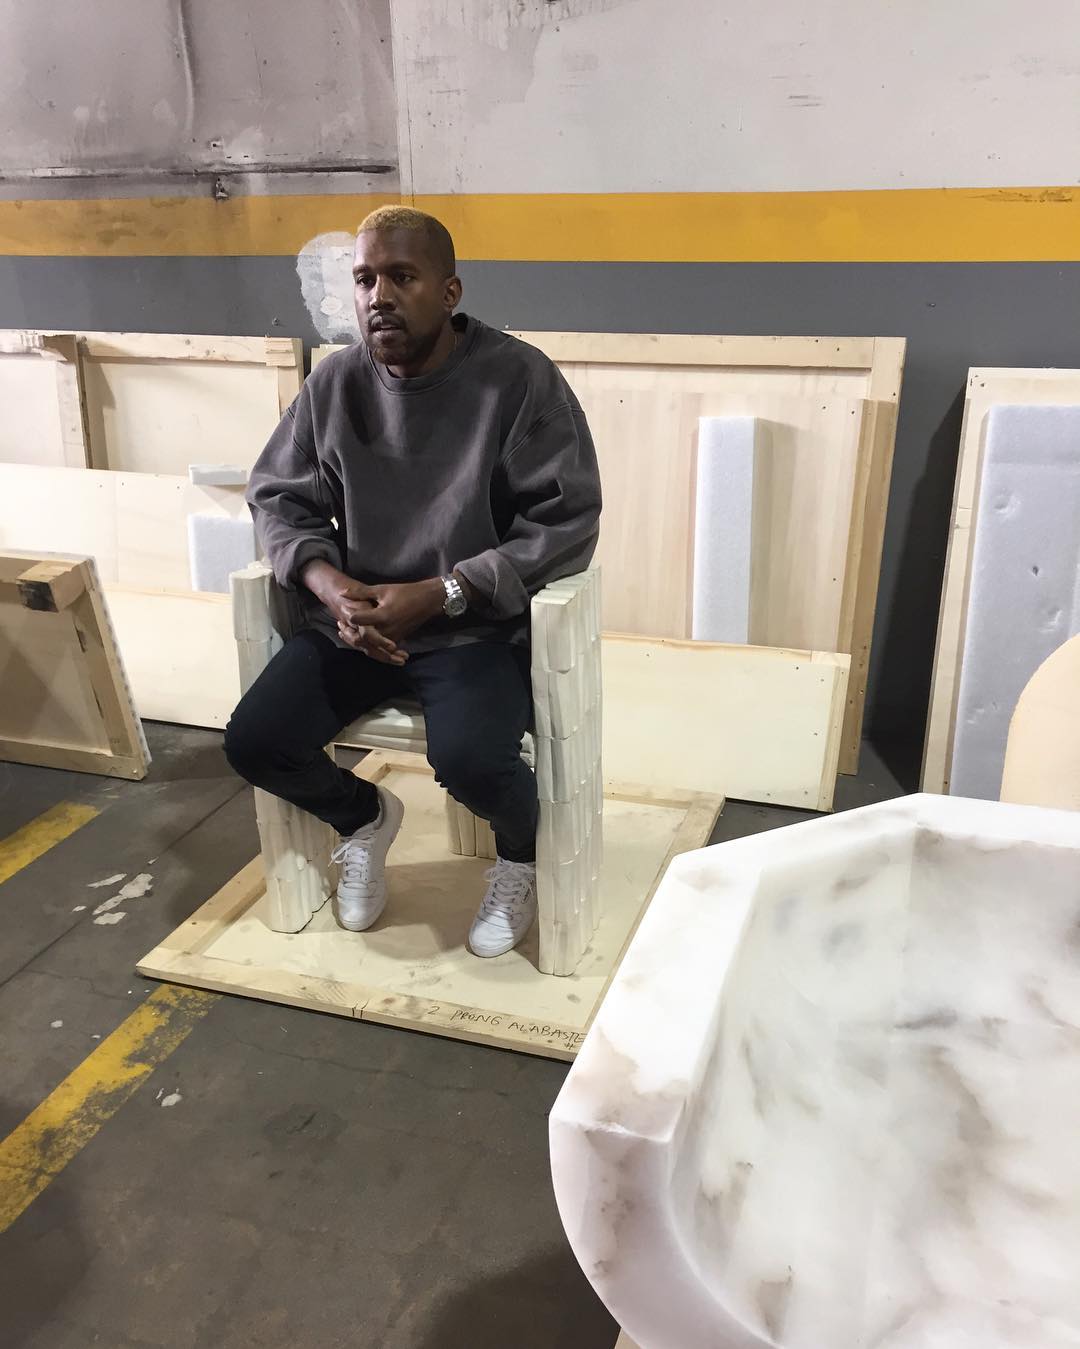 Kanye West’s First Appearance Since Hospital In Unreleased Adidas Yeezy Season 4